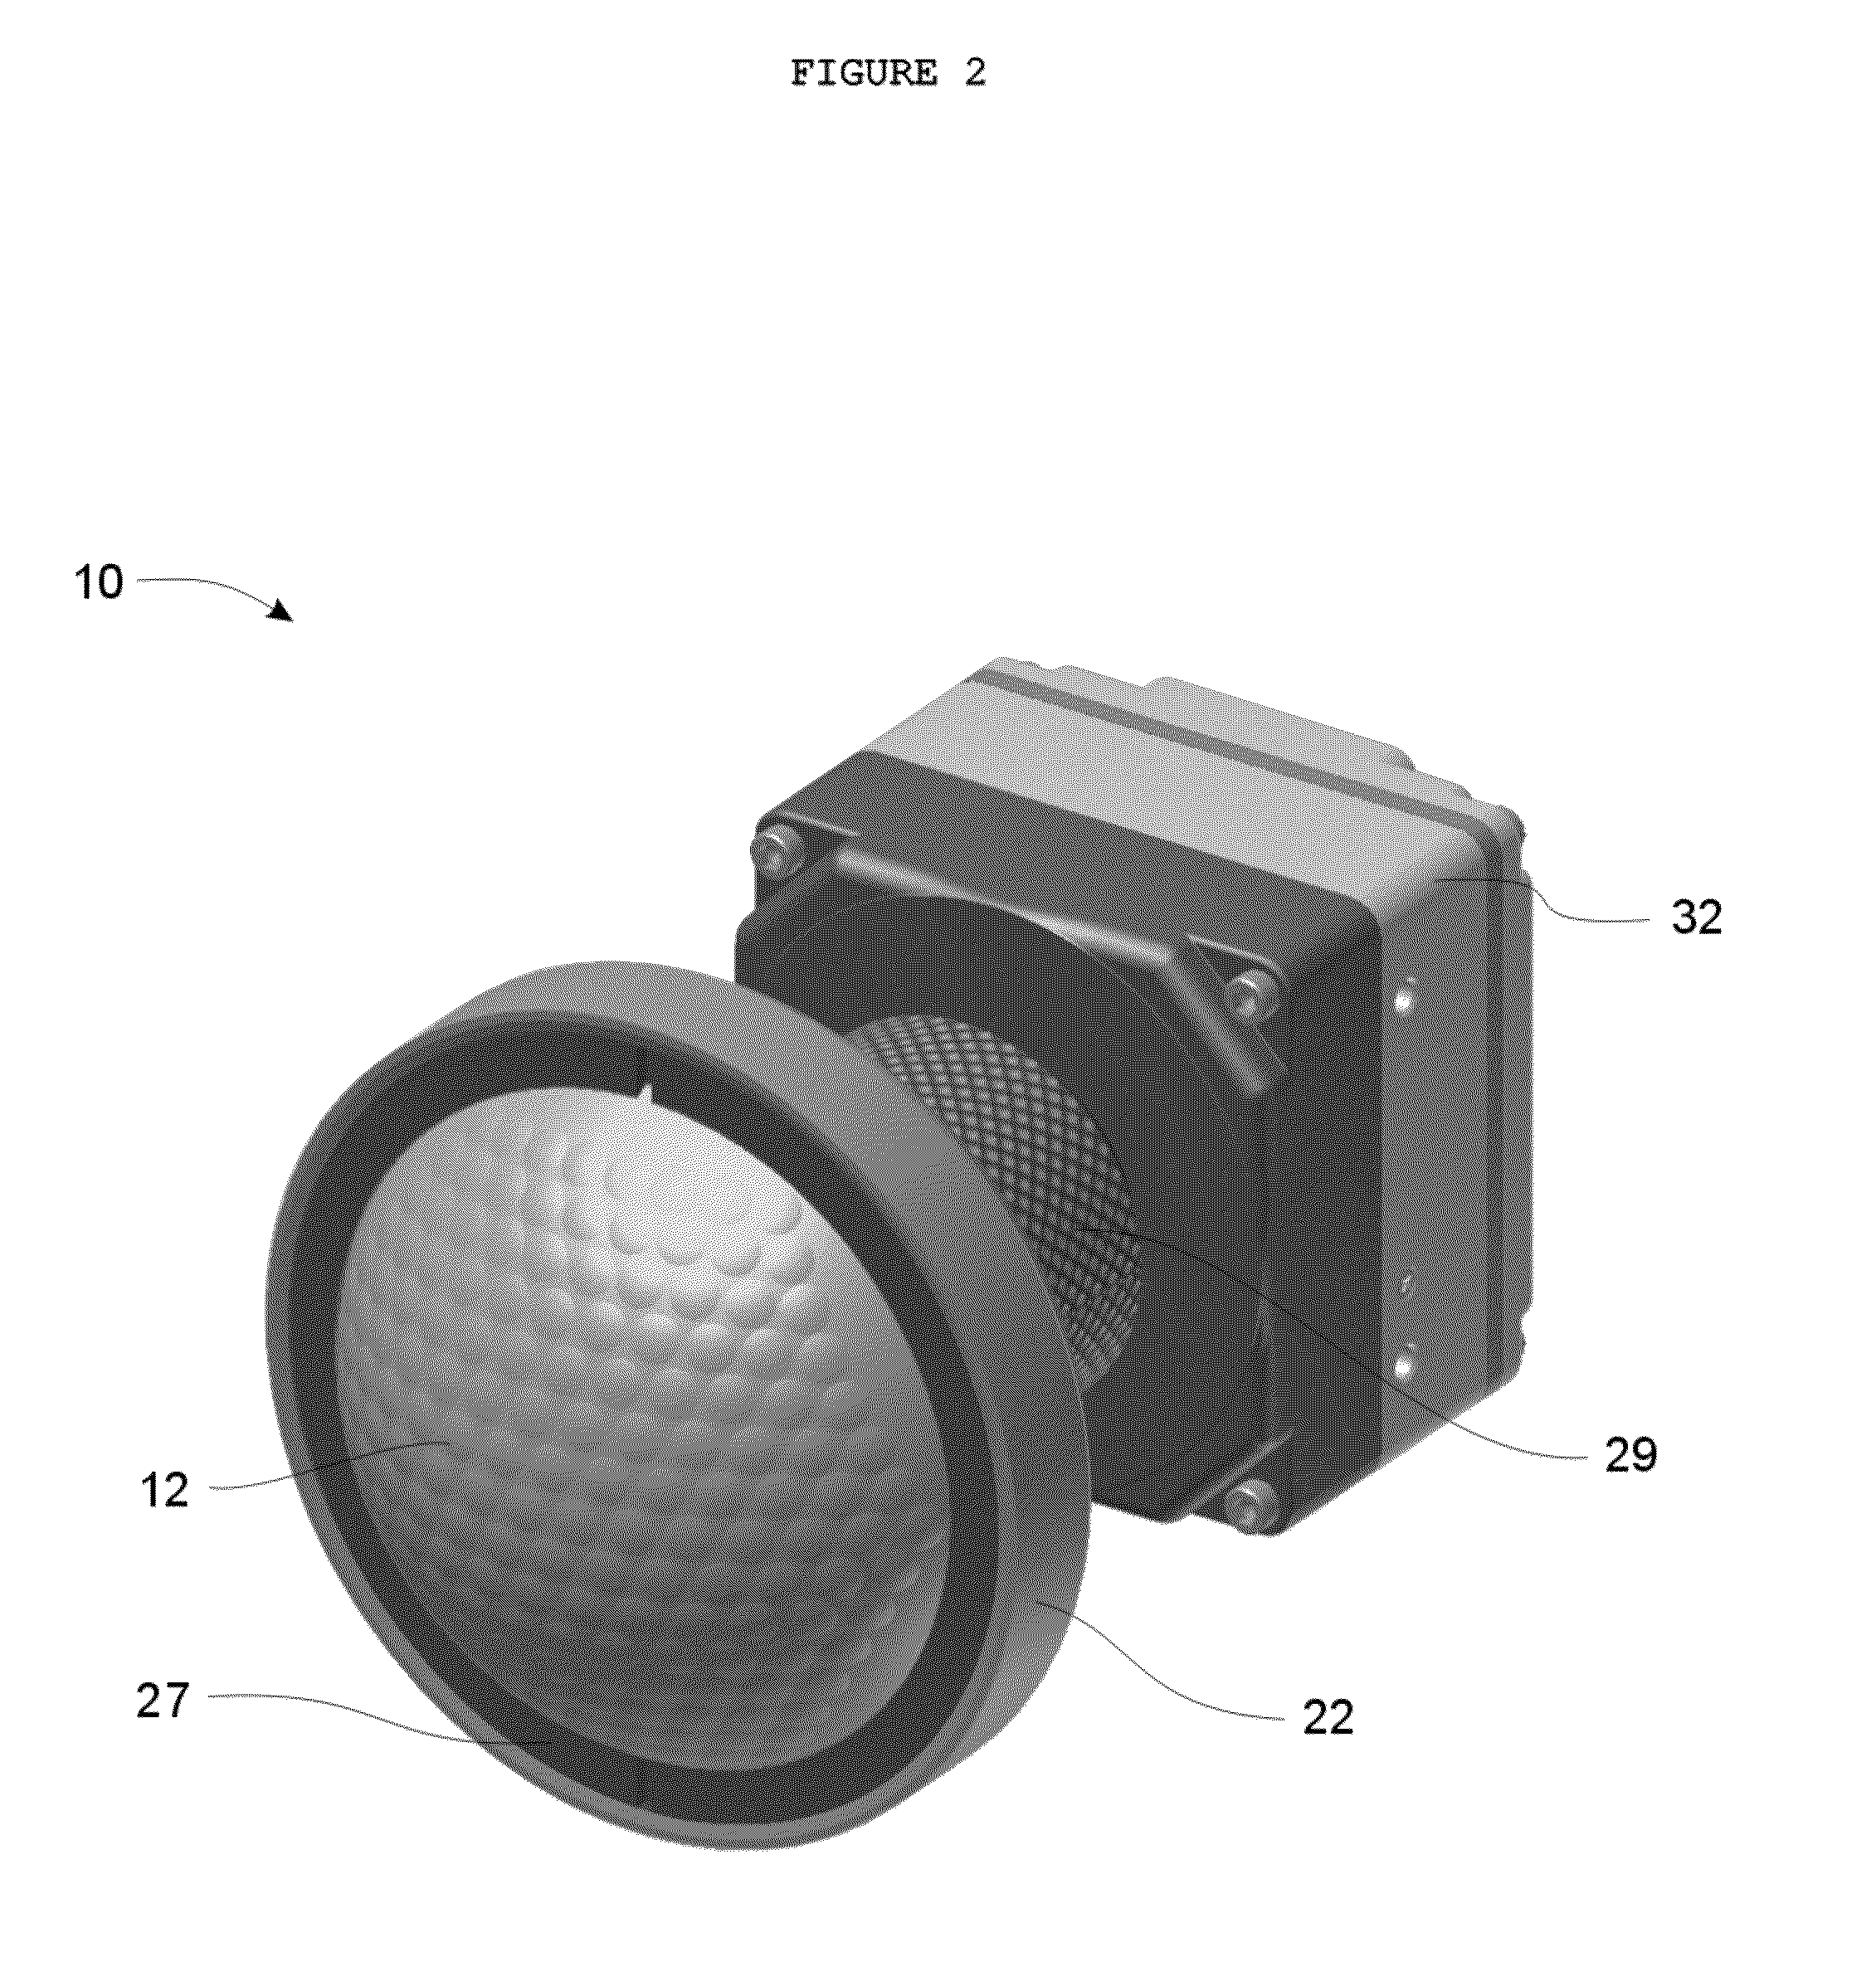 Multihybrid Artificial Compound Eye with Varied Ommatidia